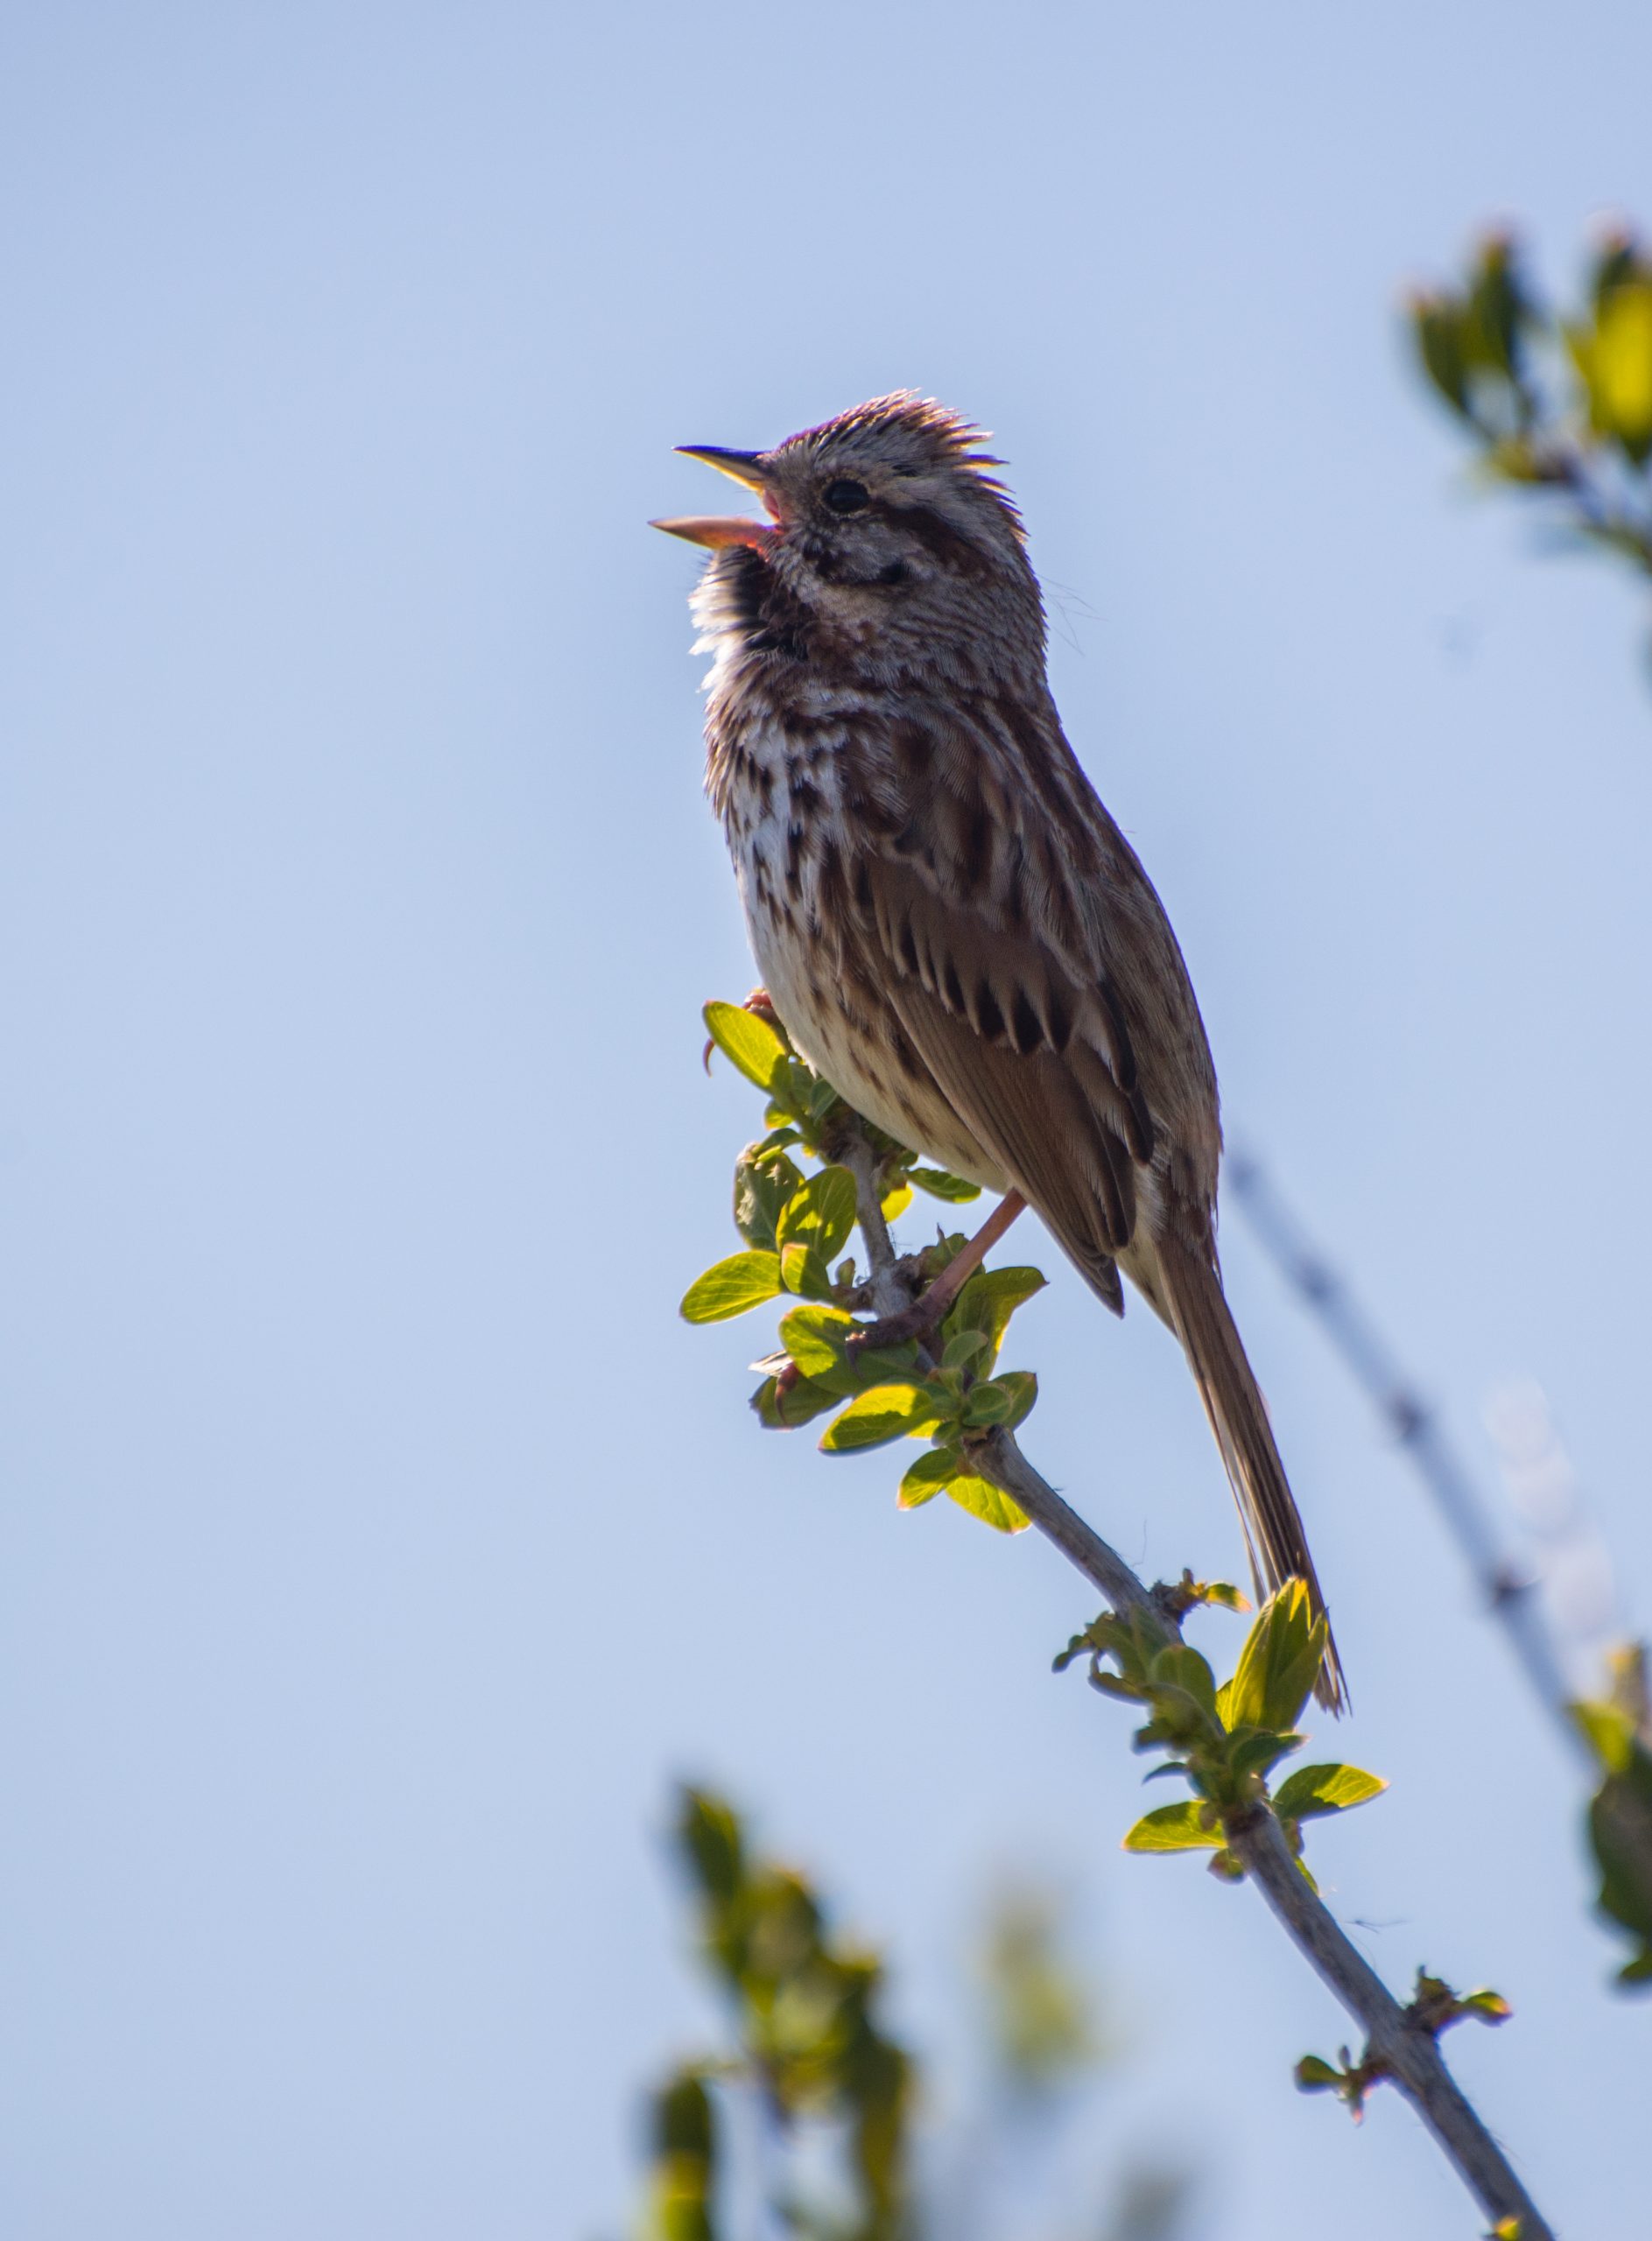 Song sparrow singing on a tree branch in Colonel Sam Smith Park.